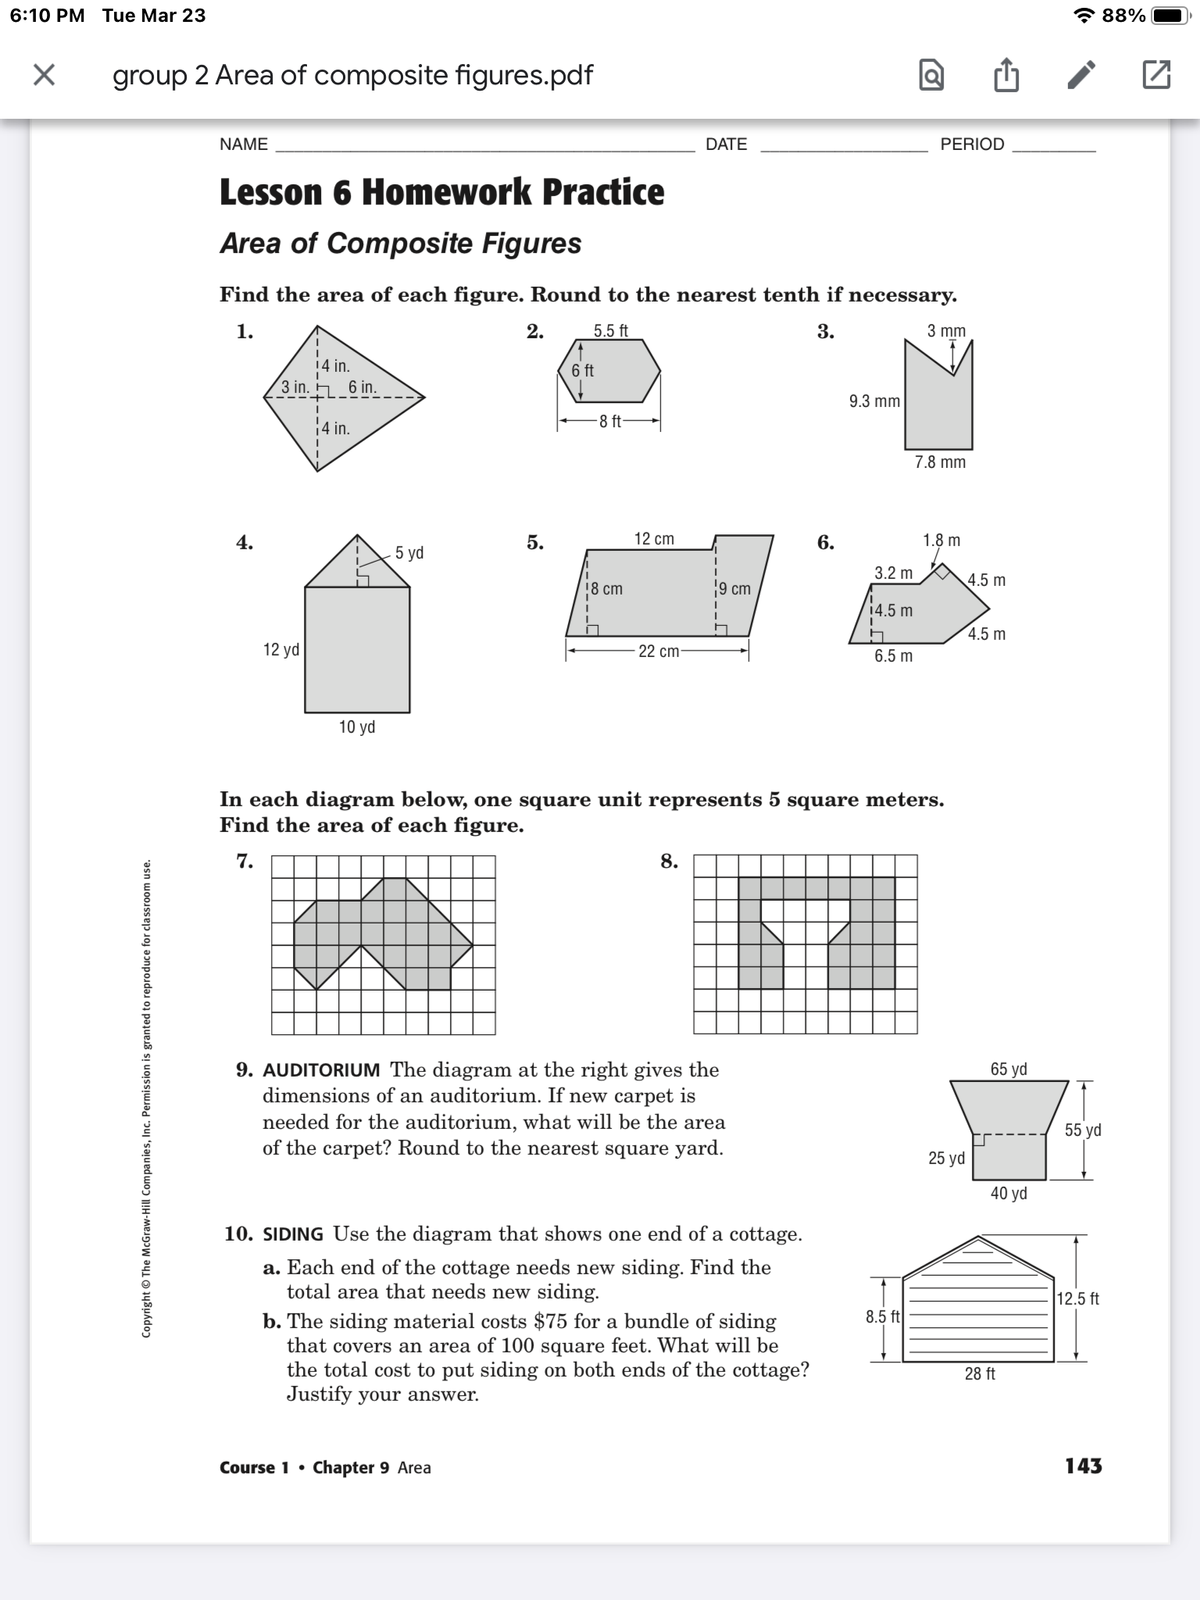 6:10 PM Tue Mar 23
* 88%
group 2 Area of composite figures.pdf
NAME
DATE
PERIOD
Lesson 6 Homework Practice
Area of Composite Figures
Find the area of each figure. Round to the nearest tenth if necessary.
1.
2.
5.5 ft
3.
3 mm
14 in.
3 in.
6 ft
6 in.
9.3 mm
8 ft-
14 in.
7.8 mm
4.
5.
12 cm
6.
1.8 m
5 yd
3.2 m
4.5 m
18 ст
9 cm
14.5 m
4.5 m
12 yd
22 cm-
6.5 m
10 yd
In each diagram below, one square unit represents 5 square meters.
Find the area of each figure.
7.
8.
65 yd
9. AUDITORIUM The diagram at the right gives the
dimensions of an auditorium. If new carpet is
needed for the auditorium, what will be the area
of the carpet? Round to the nearest square yard.
55 yd
25 yd
40 yd
10. SIDING Use the diagram that shows one end of a cottage.
a. Each end of the cottage needs new siding. Find the
total area that needs new siding.
12.5 ft
8.5 ft
b. The siding material costs $75 for a bundle of siding
that covers an area of 100 square feet. What will be
the total cost to put siding on both ends of the cottage?
Justify your answer.
28 ft
Course 1 •
Chapter 9 Area
143
Copyright © The McGraw-Hill Com panies, Inc. Permission is granted to reproduce for classroom use.
